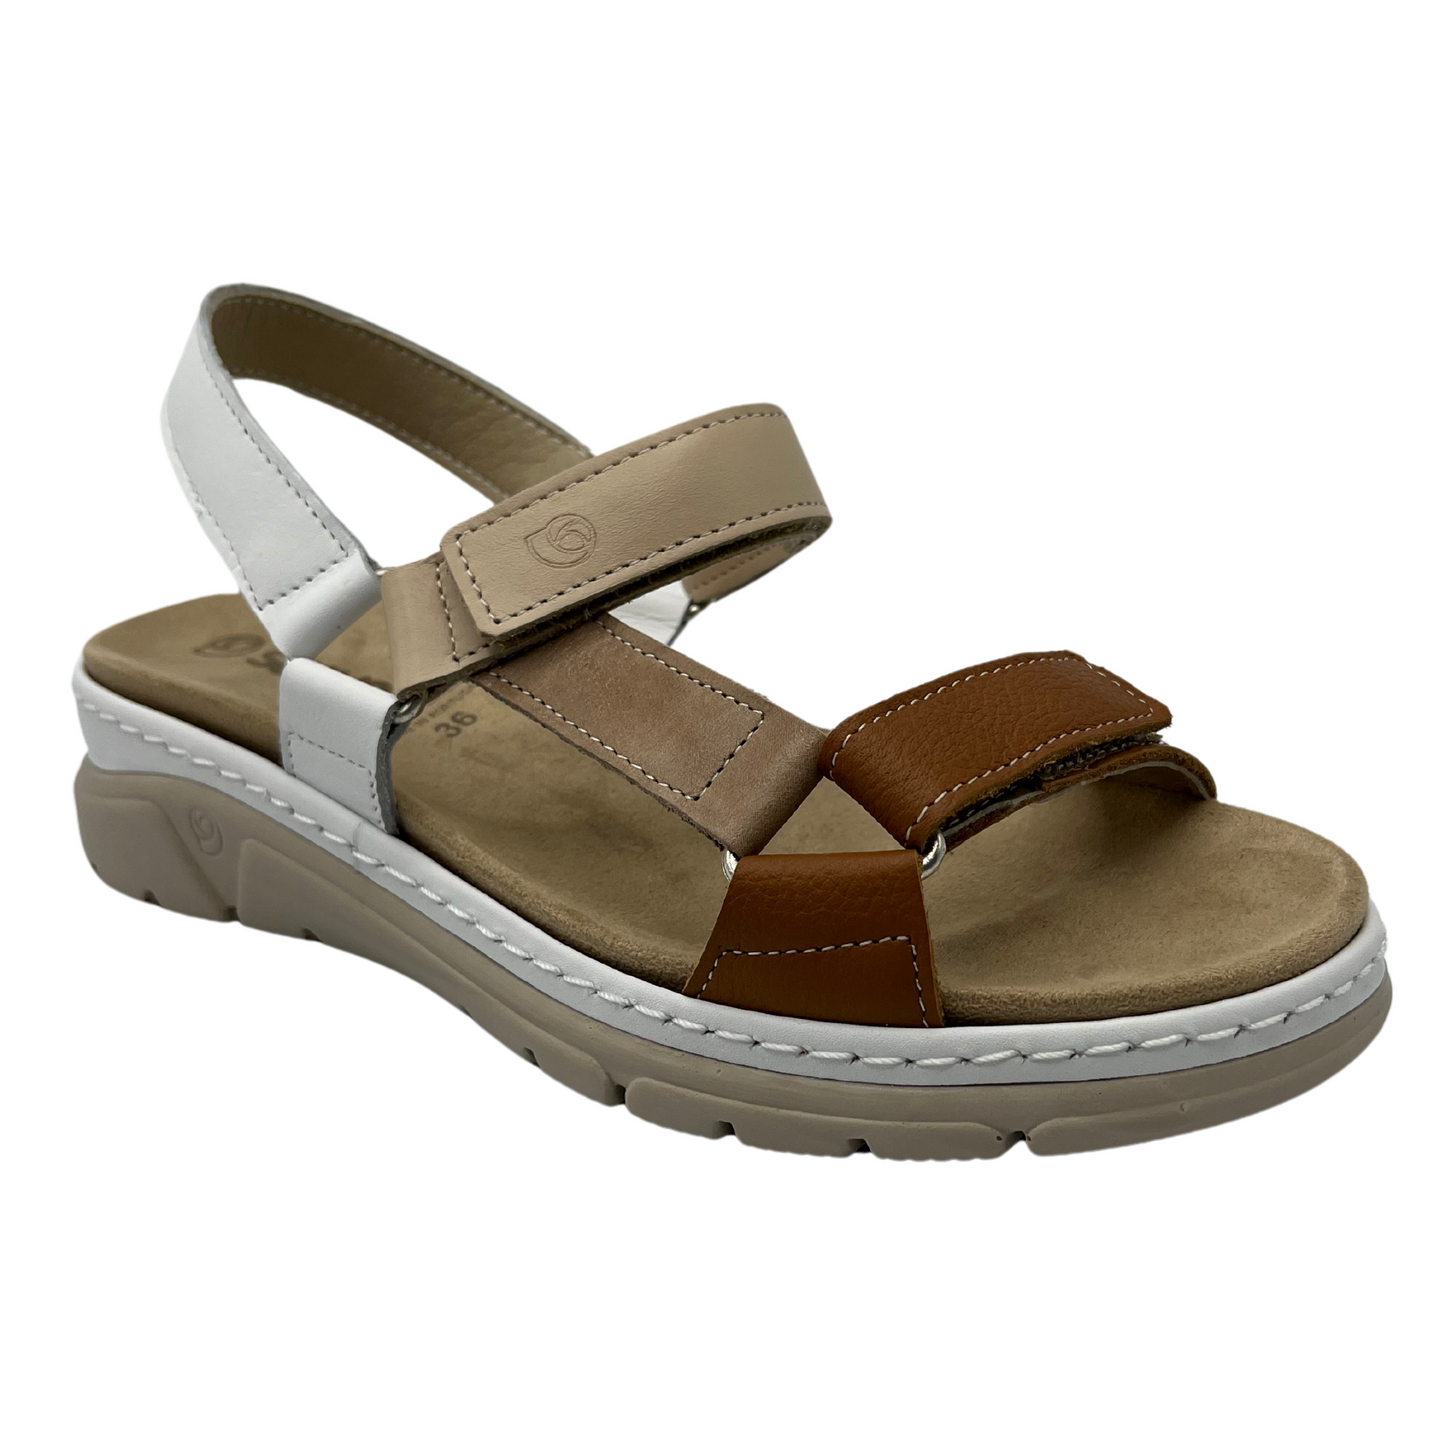 45 degree angled view of suede sandal with brown, white and tan straps